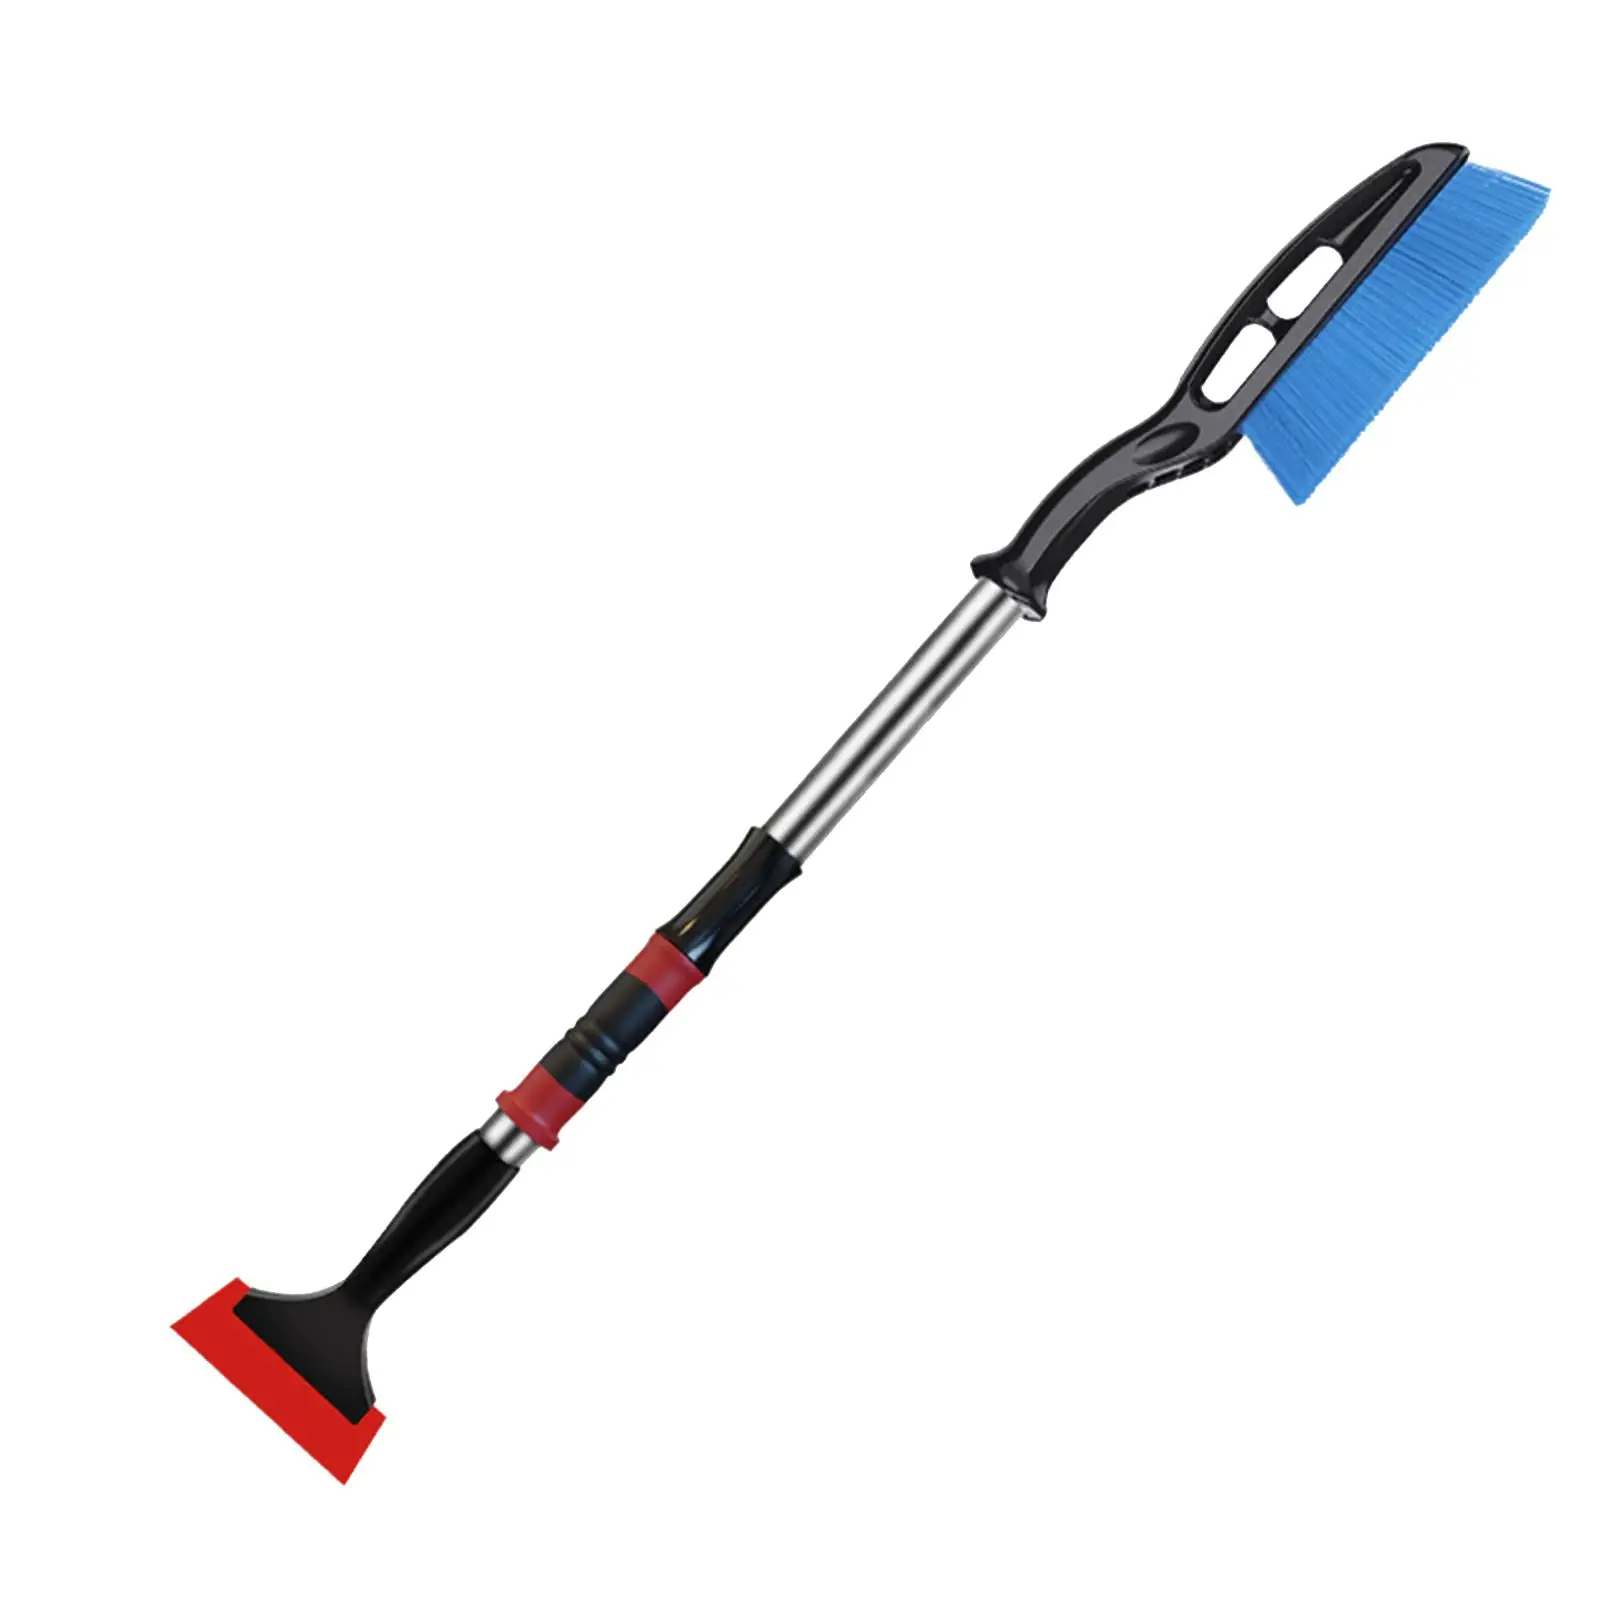 Car Snow Removal Brush Shovel Universal with Grip Telescopic Rod Snow Cleaning